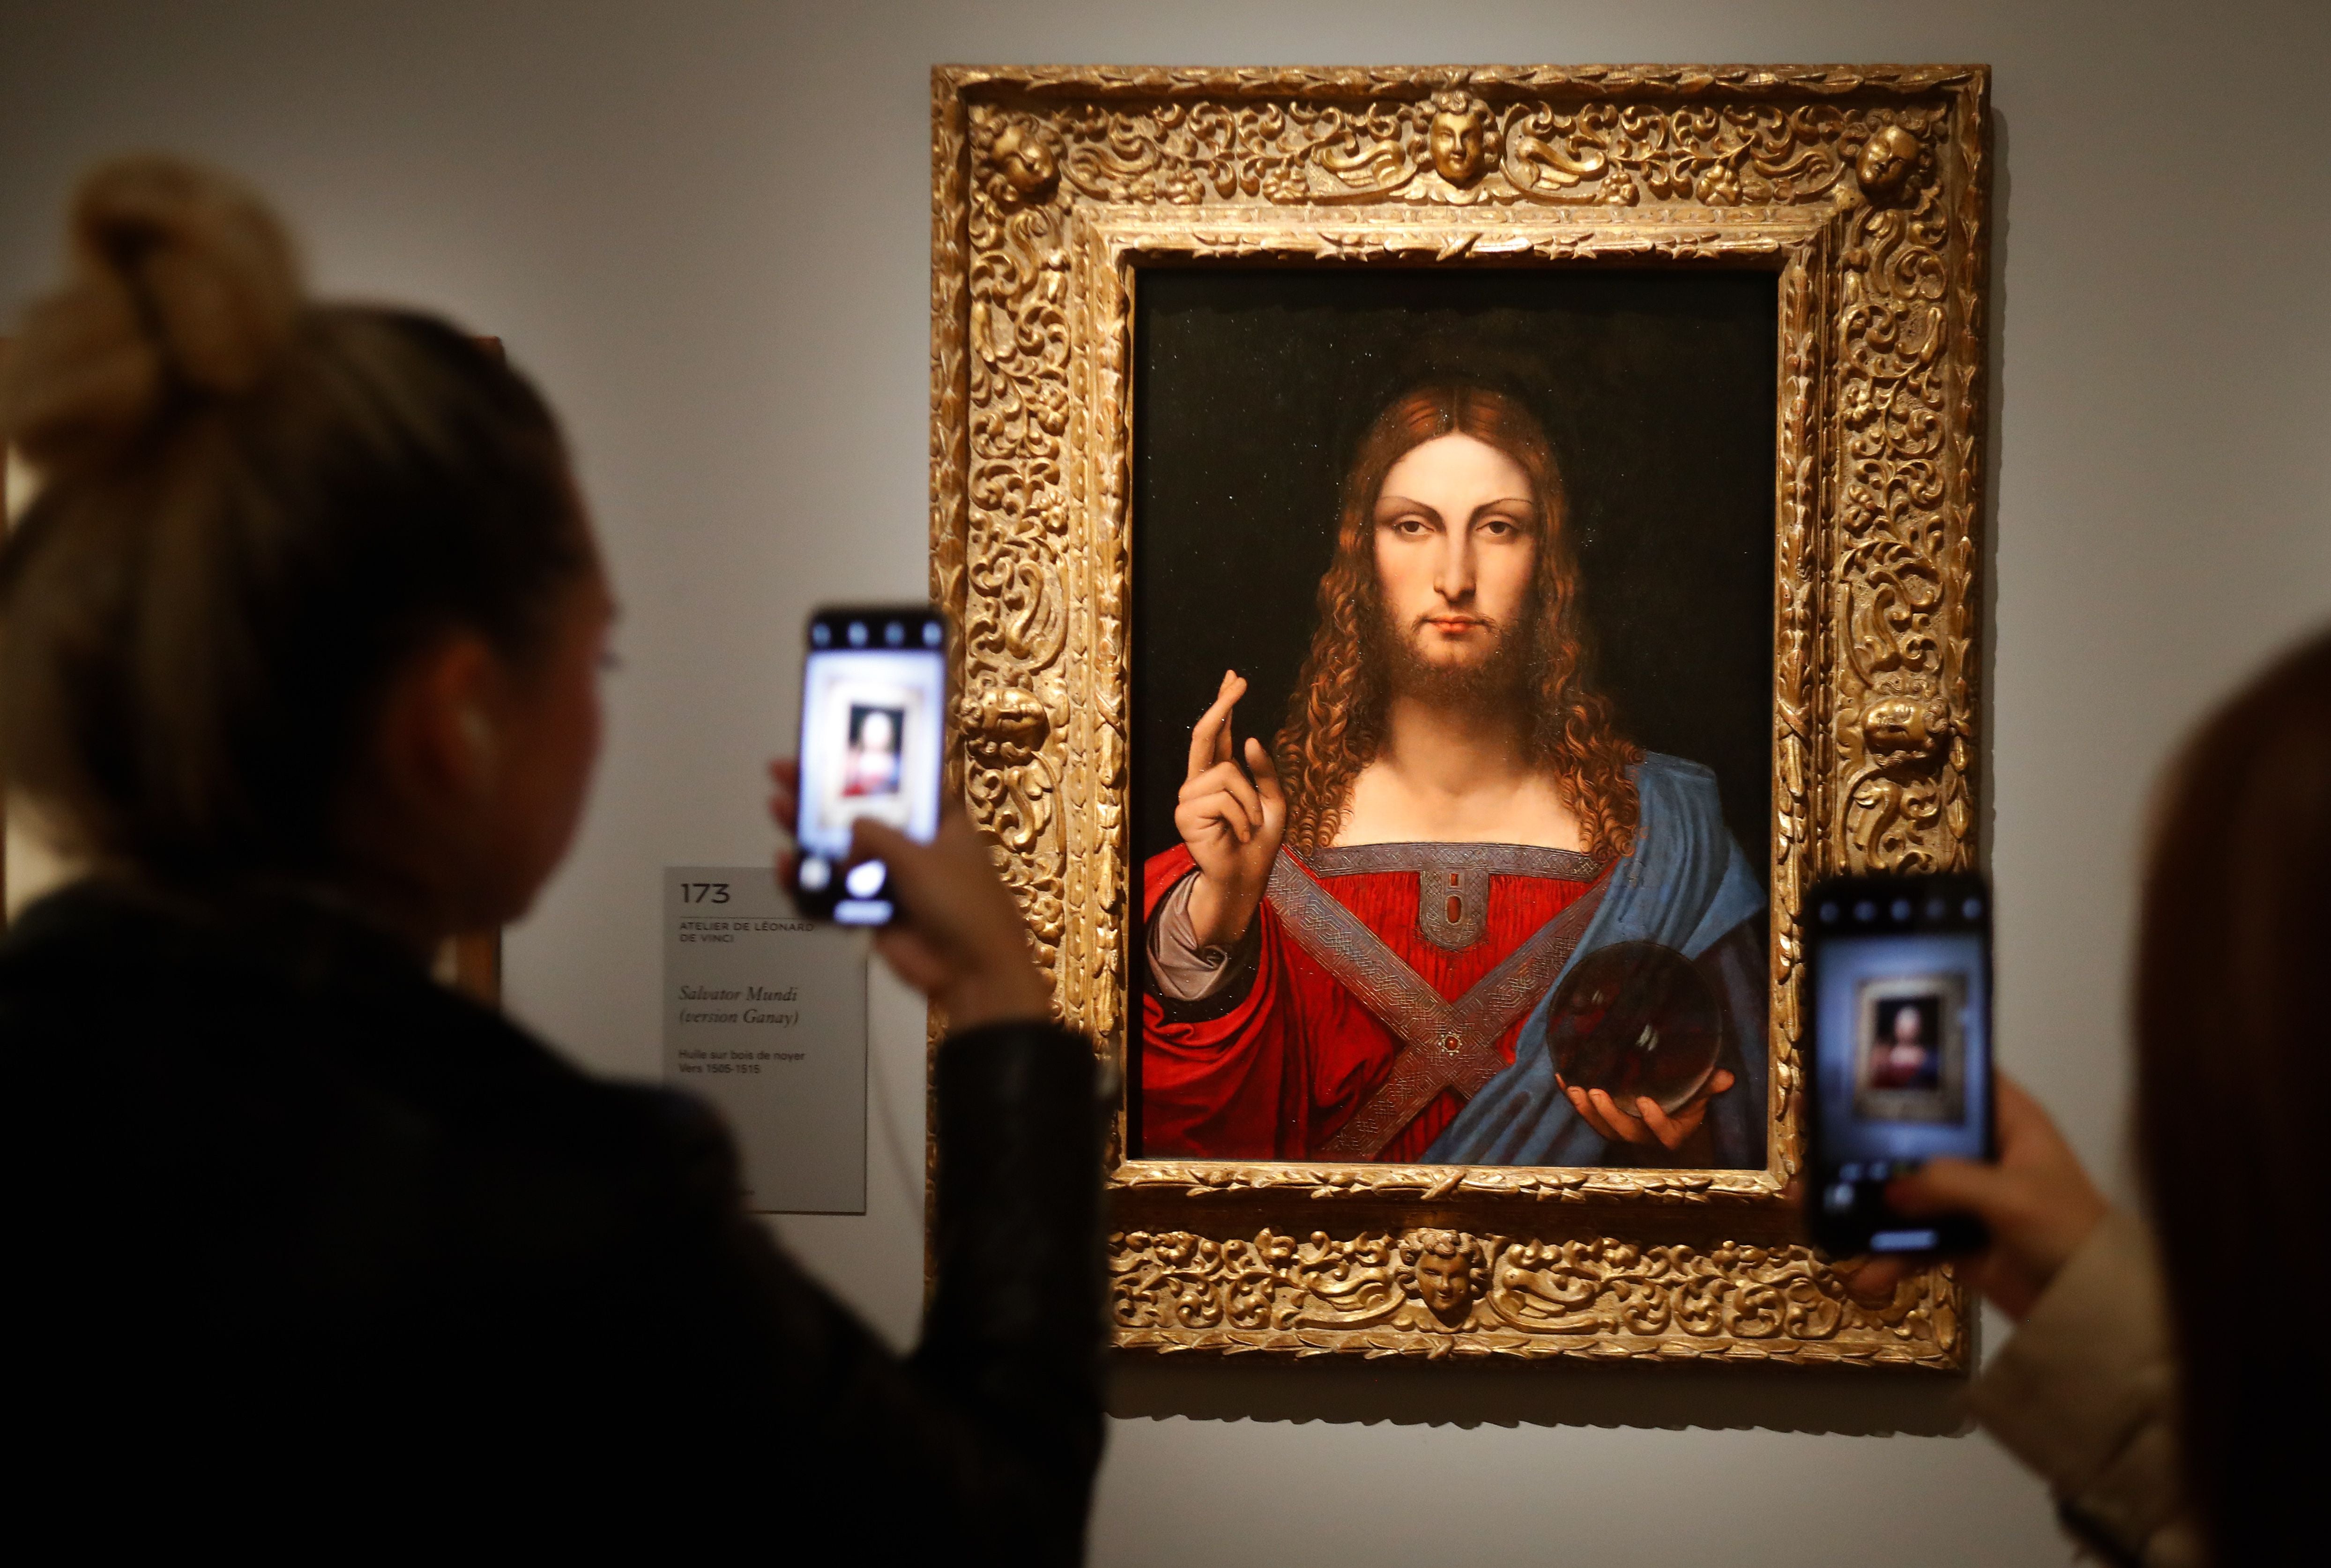 ‘Salvator Mundi’, possibly created by Da Vinci, was bought for $450m in 2017